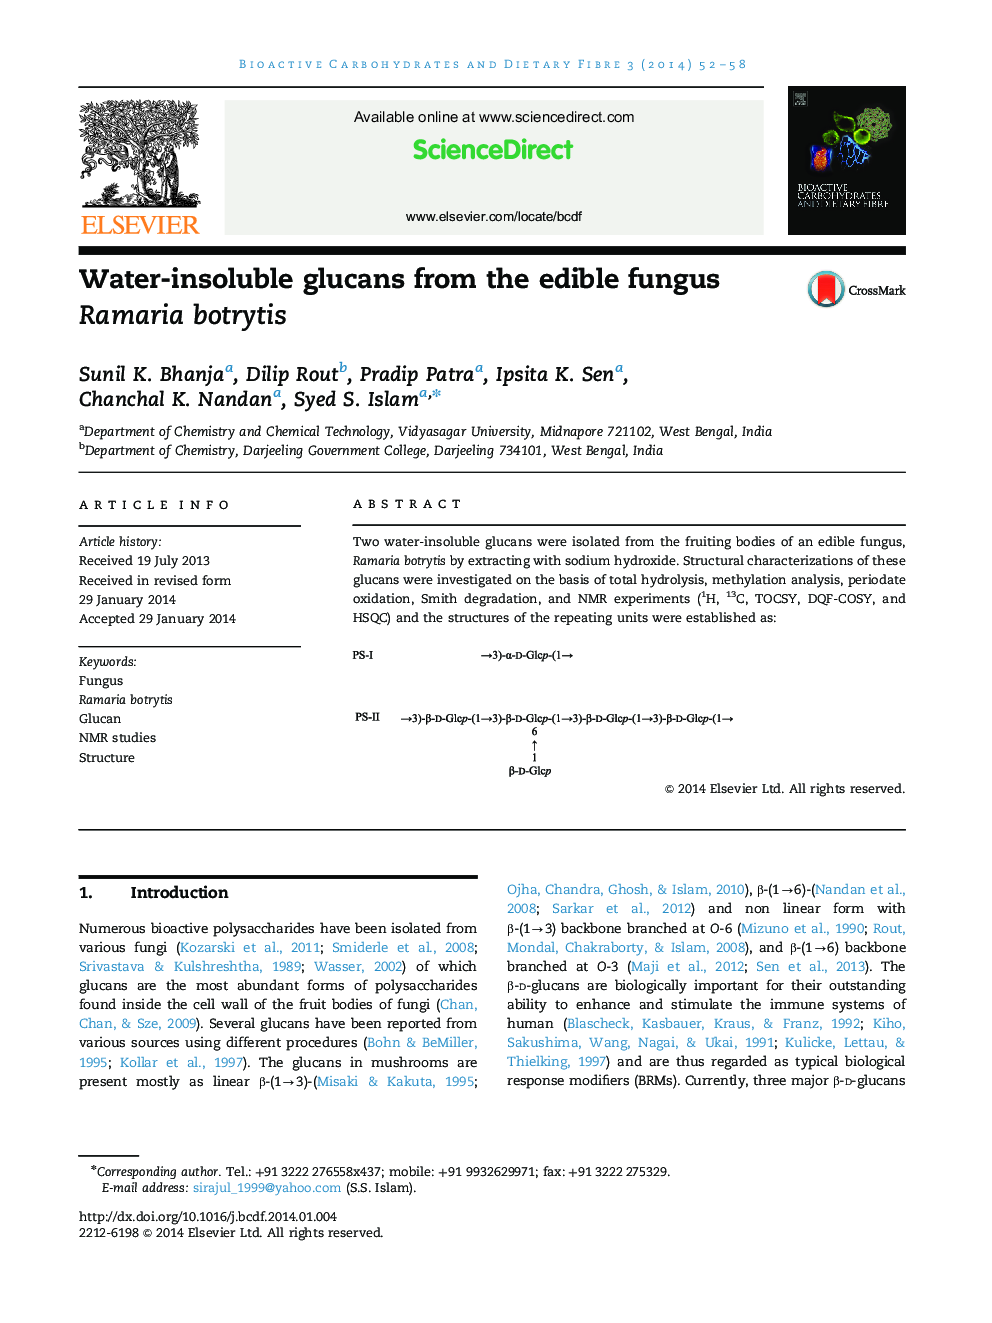 Water-insoluble glucans from the edible fungus Ramaria botrytis